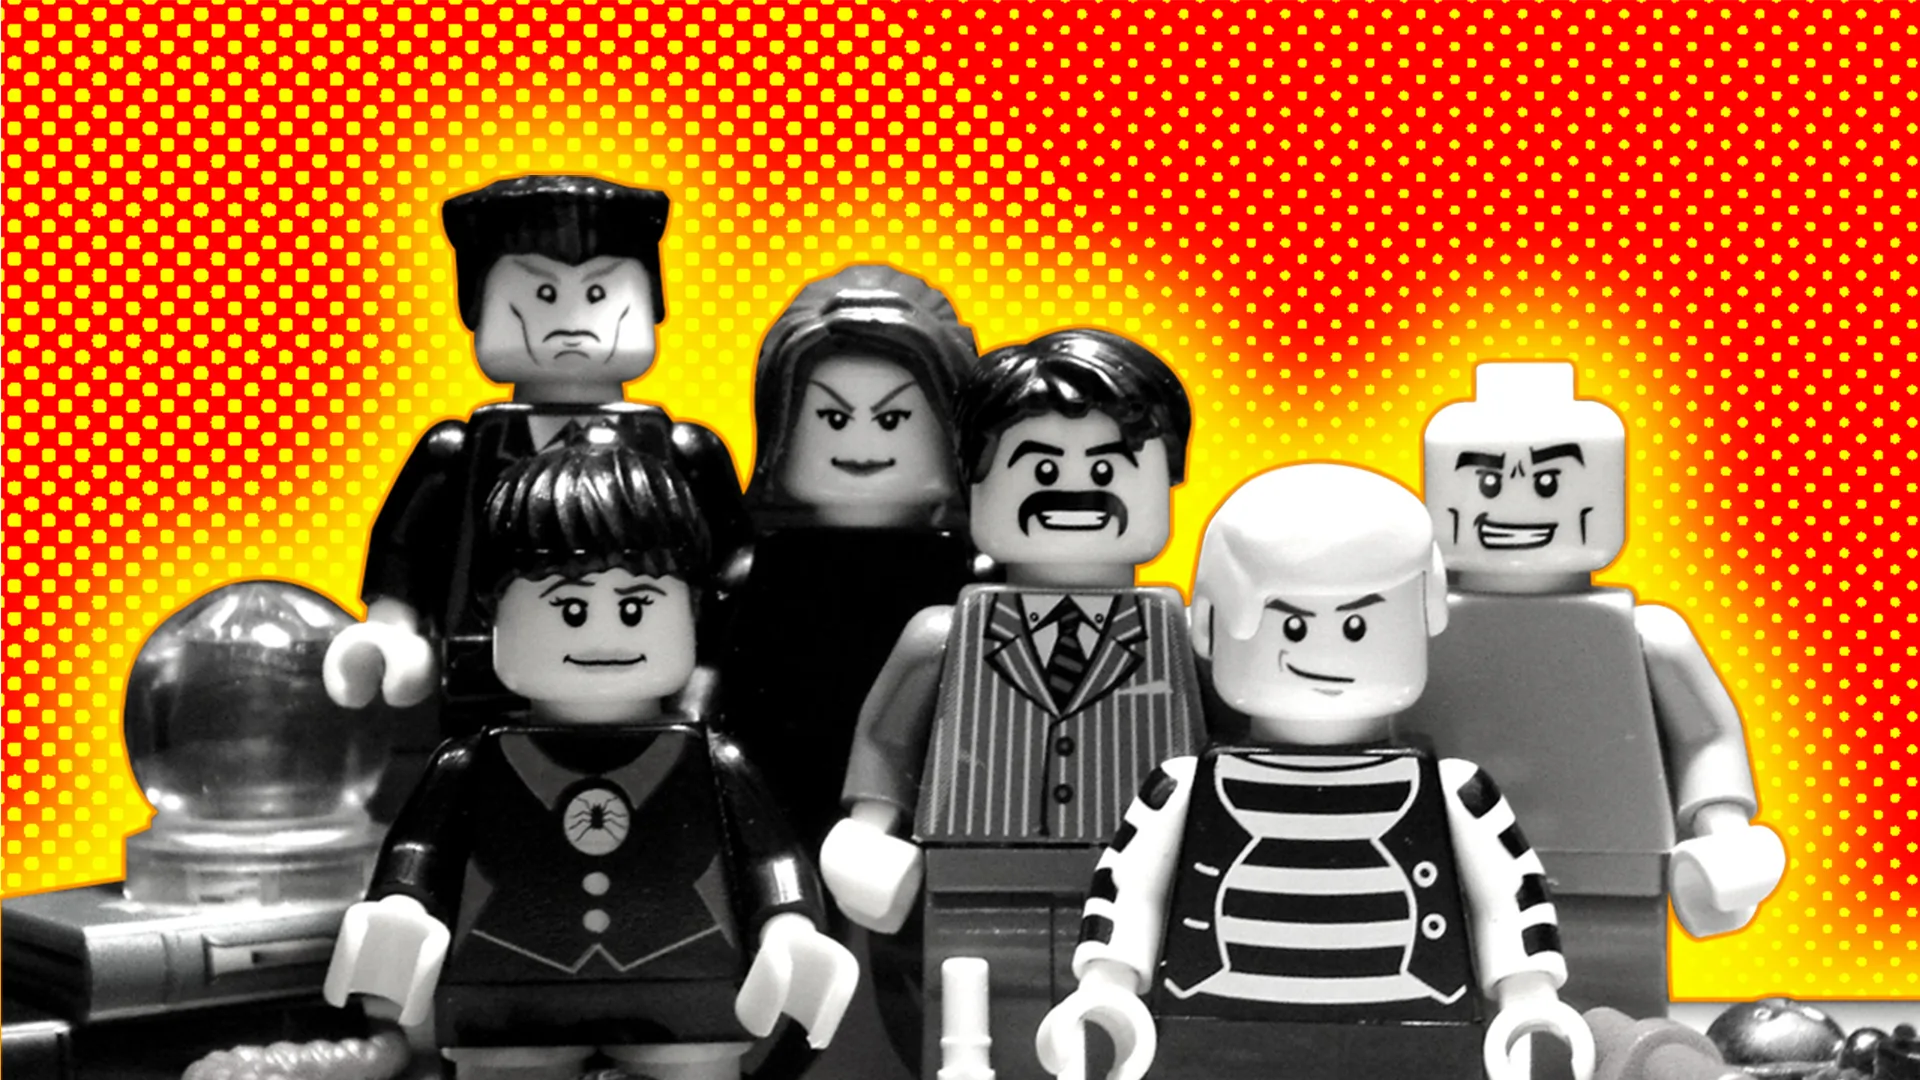 Lego Adams Family - in graphic house style